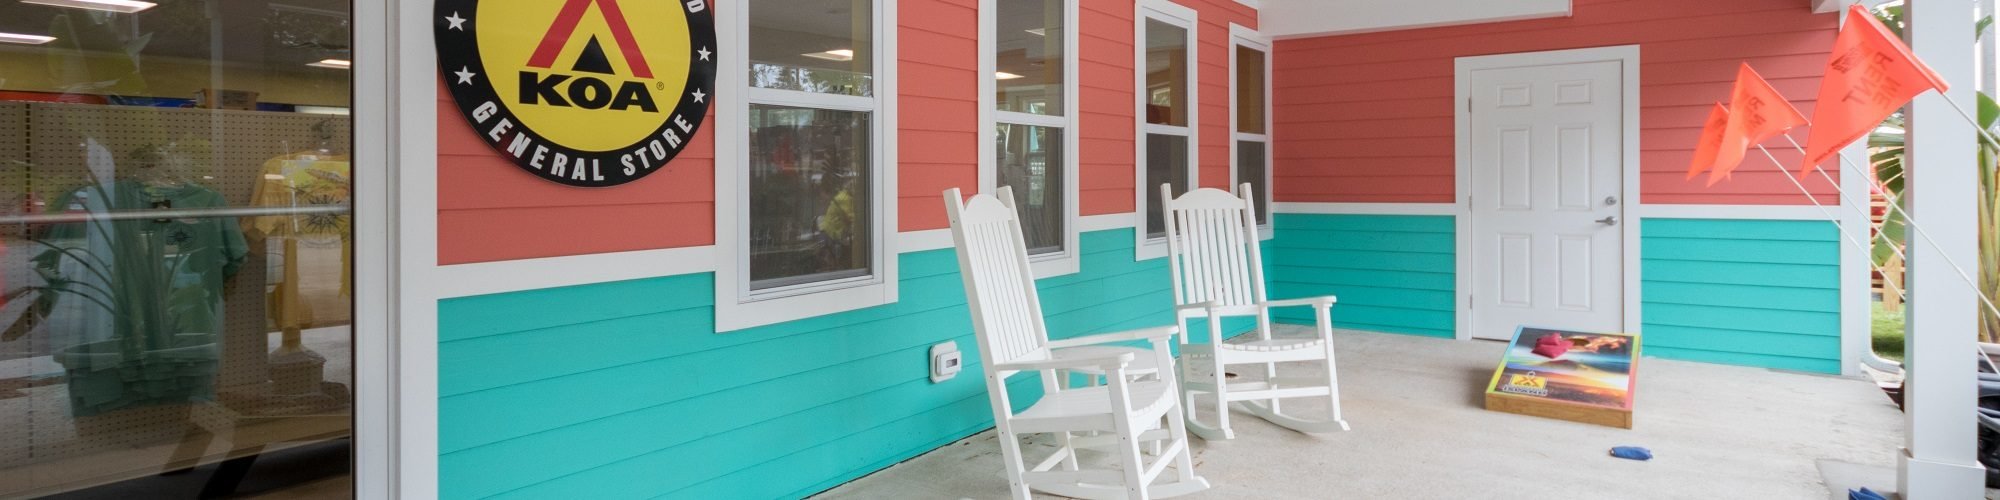 Chincoteague Island KOA General Store with bag toss game in front of bright coral and teal building